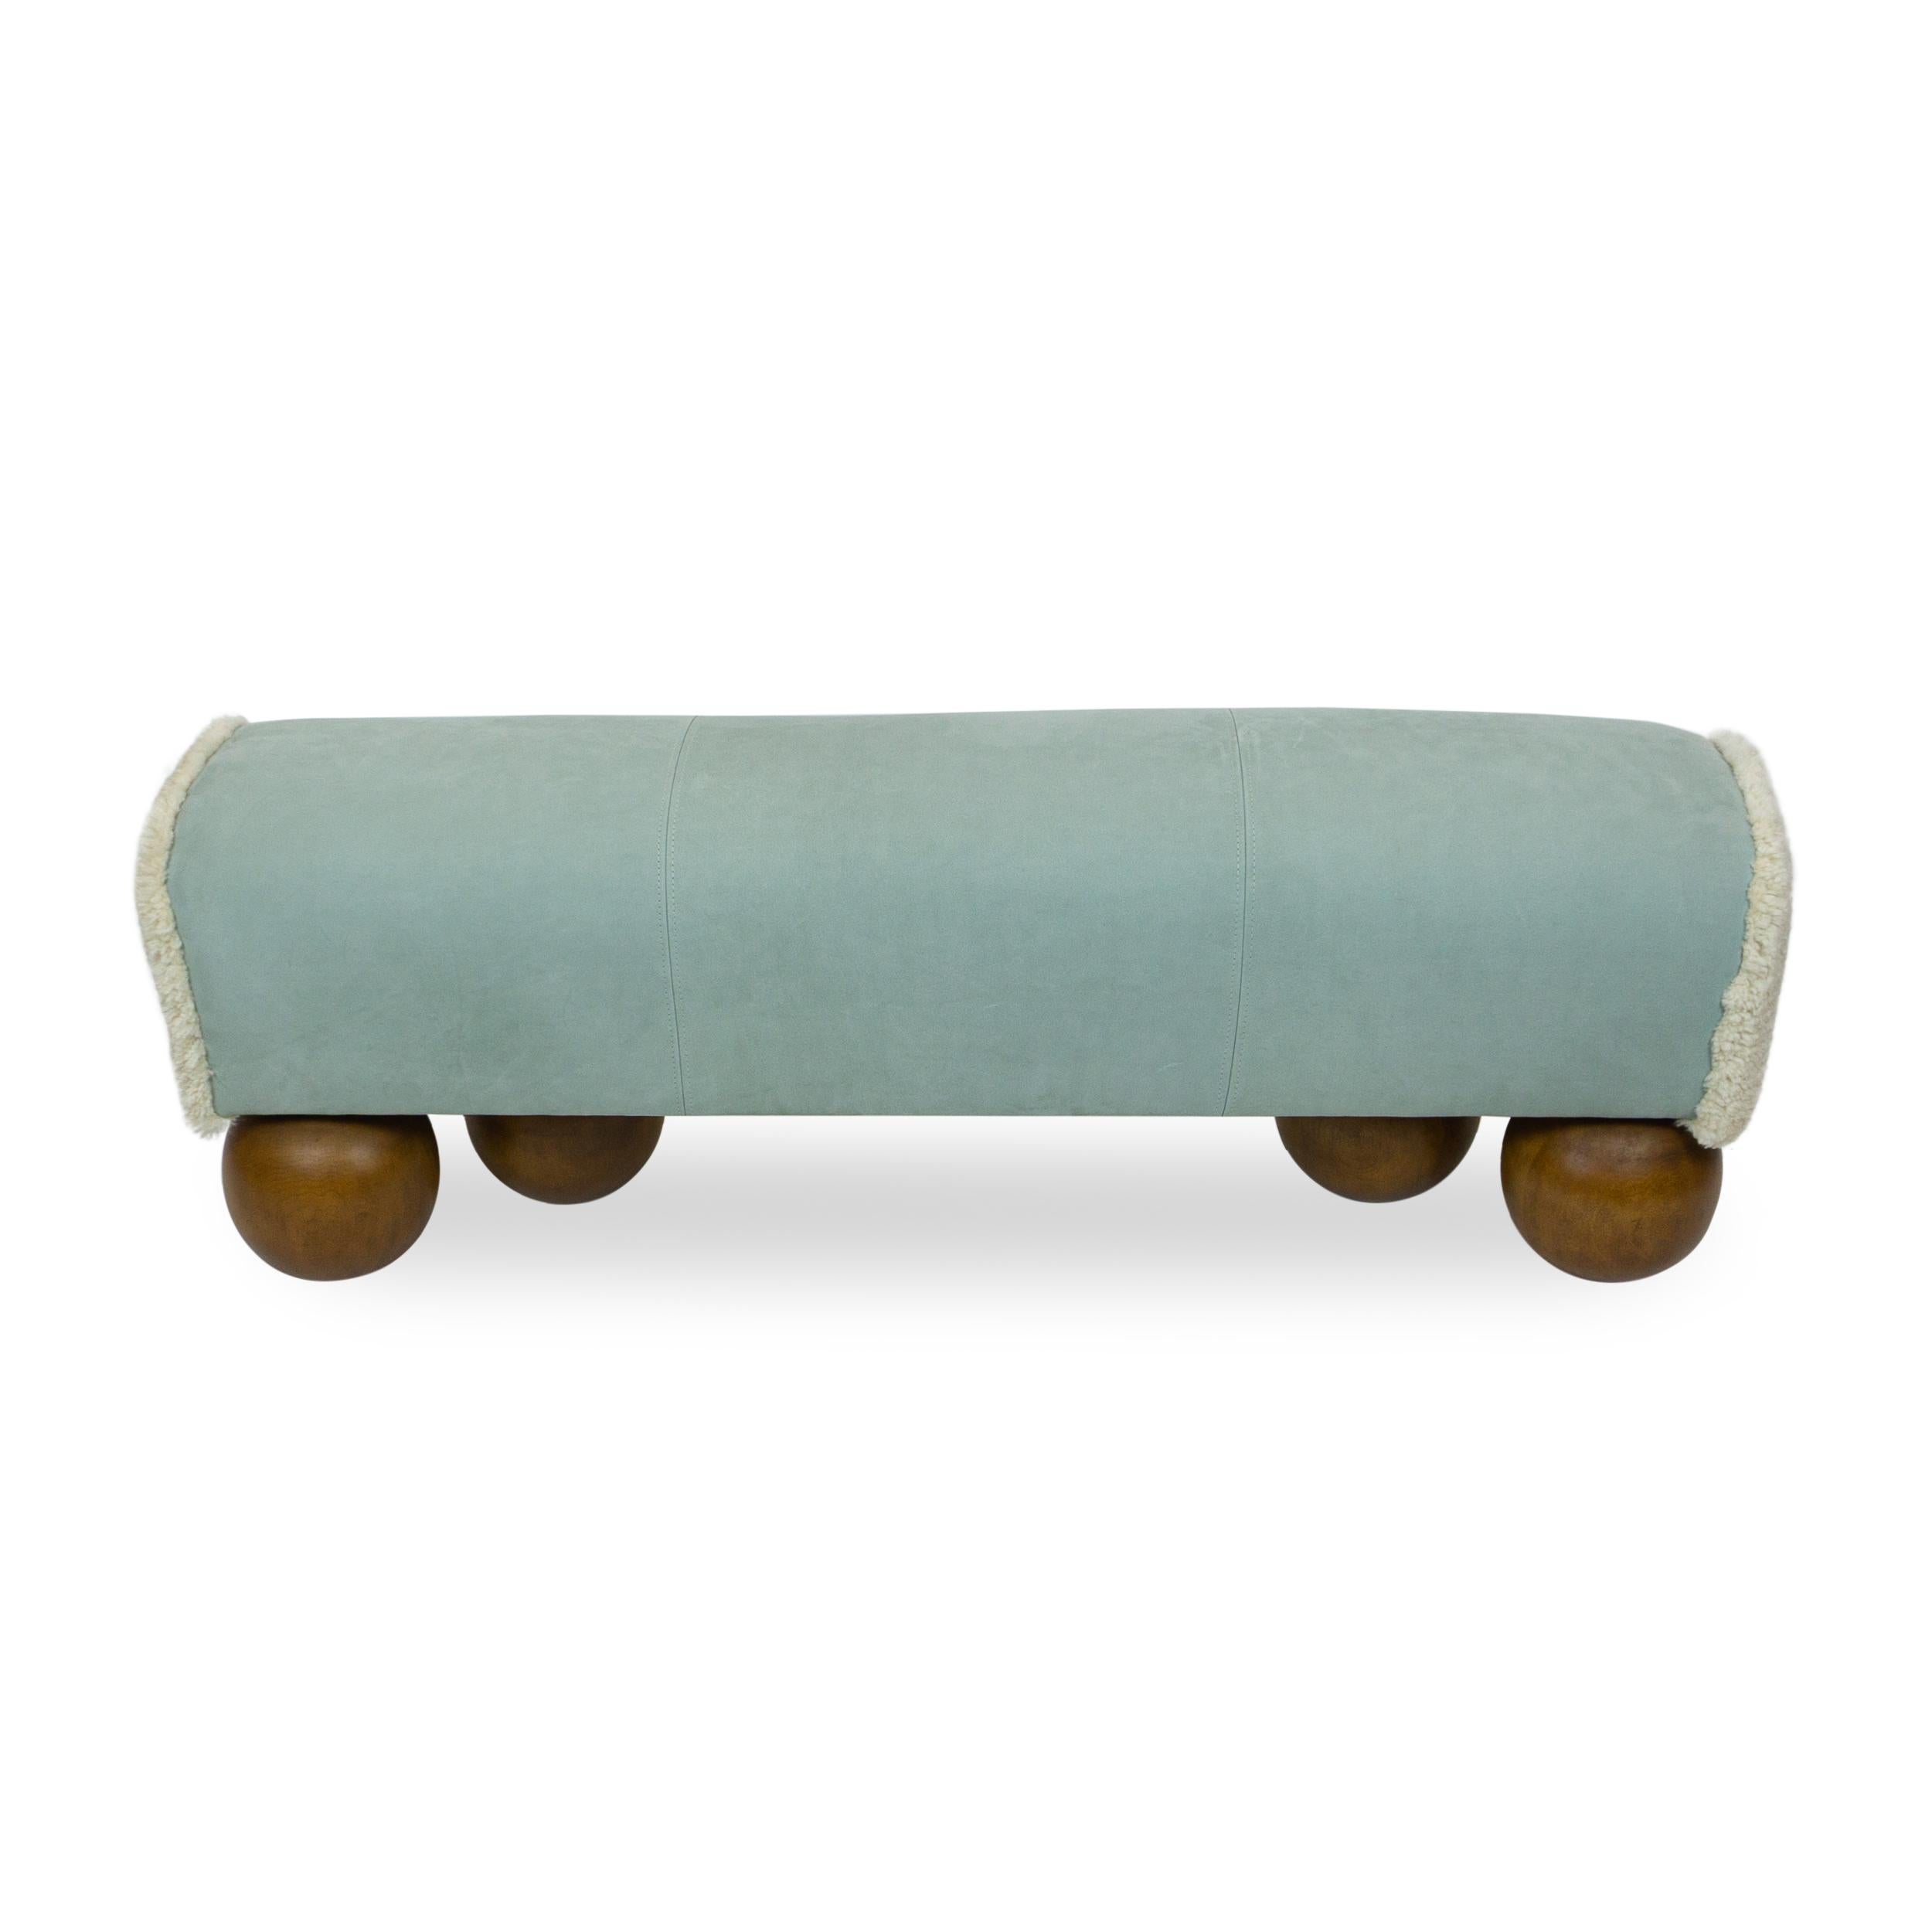 Walnut Ball Foot Bench with Leather Saddle Shaped Seat, Customizable In New Condition For Sale In Greenwich, CT